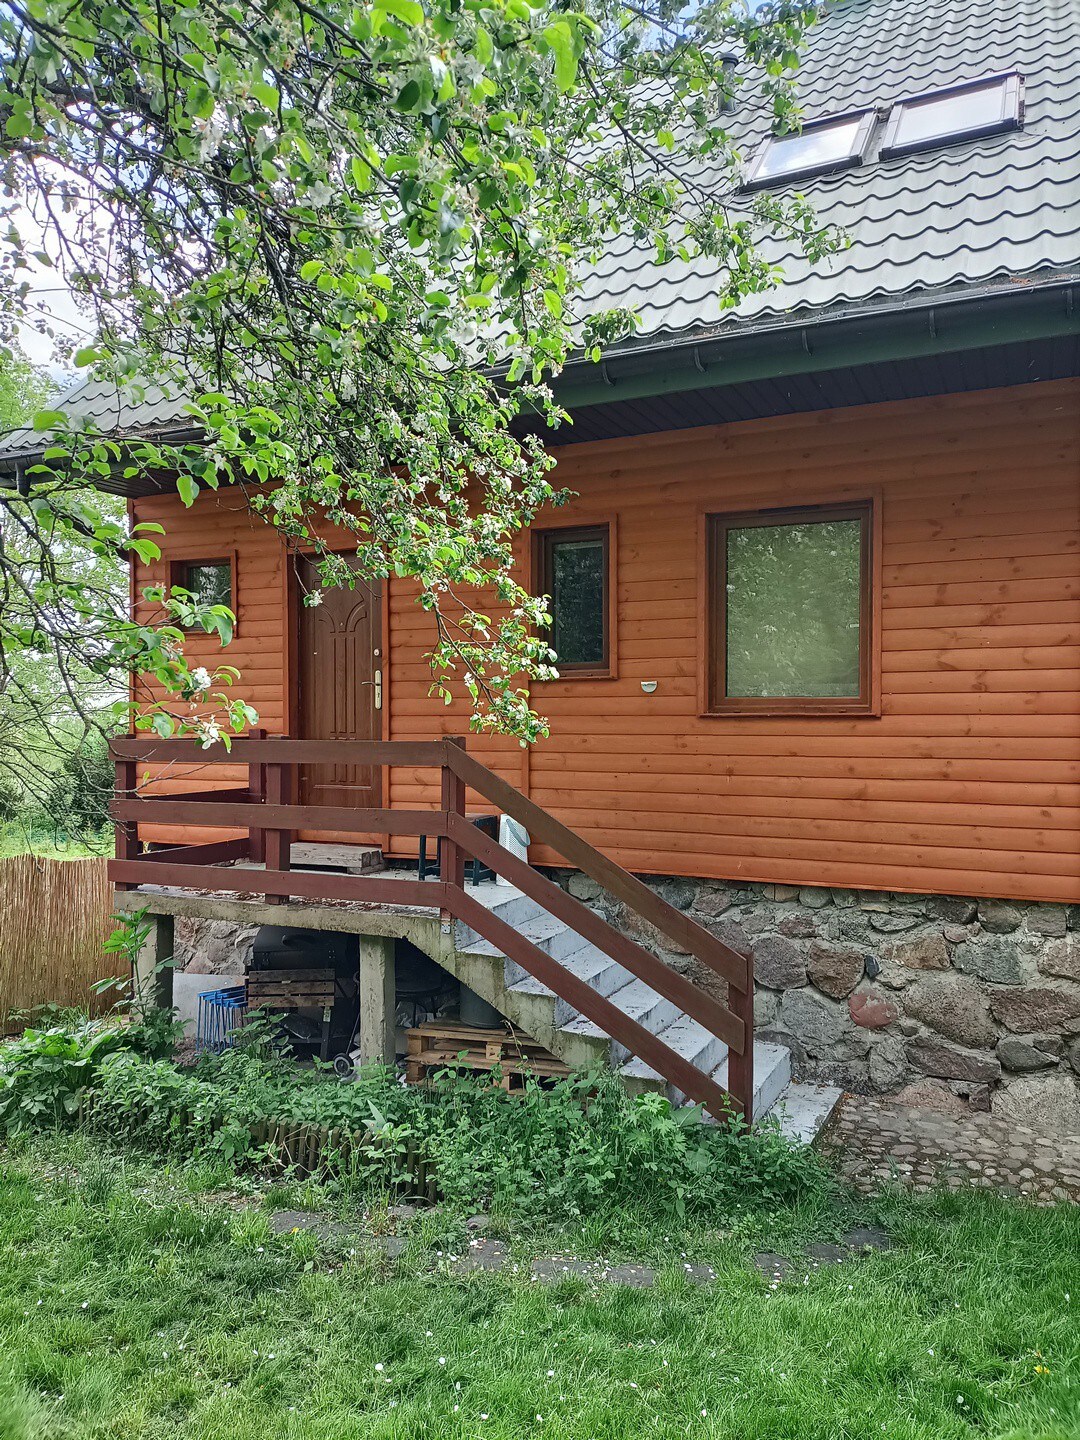 Appartment  in cottage house near Narew river.